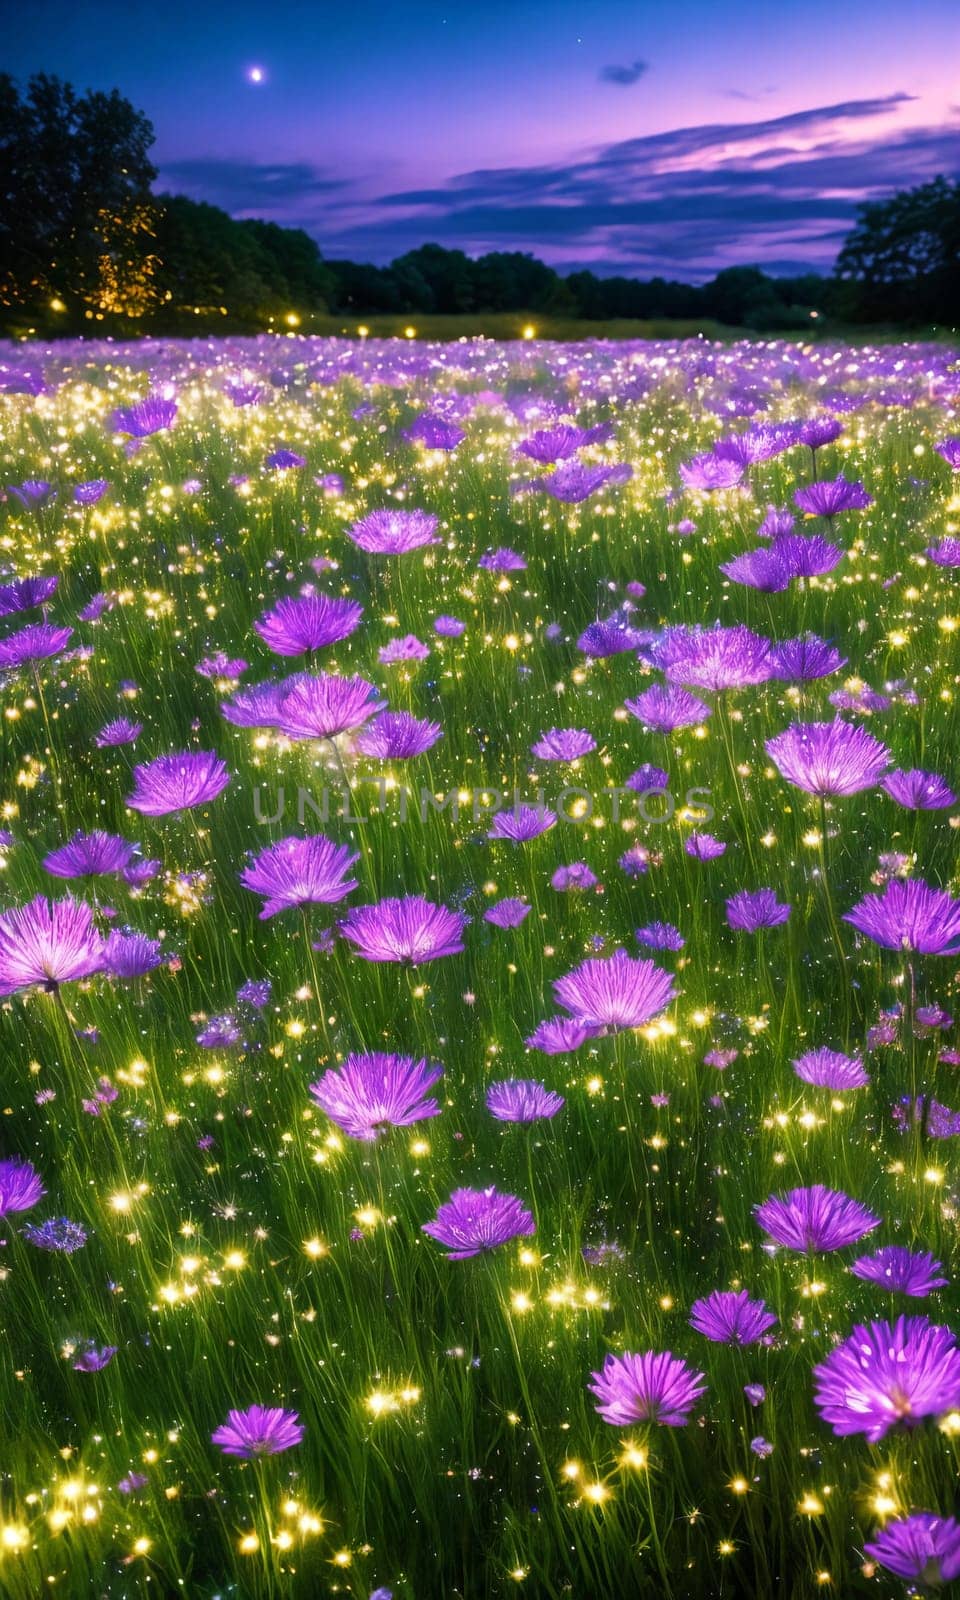 Stardust Meadow. At twilight, a meadow blooms with luminescent flowers. by GoodOlga